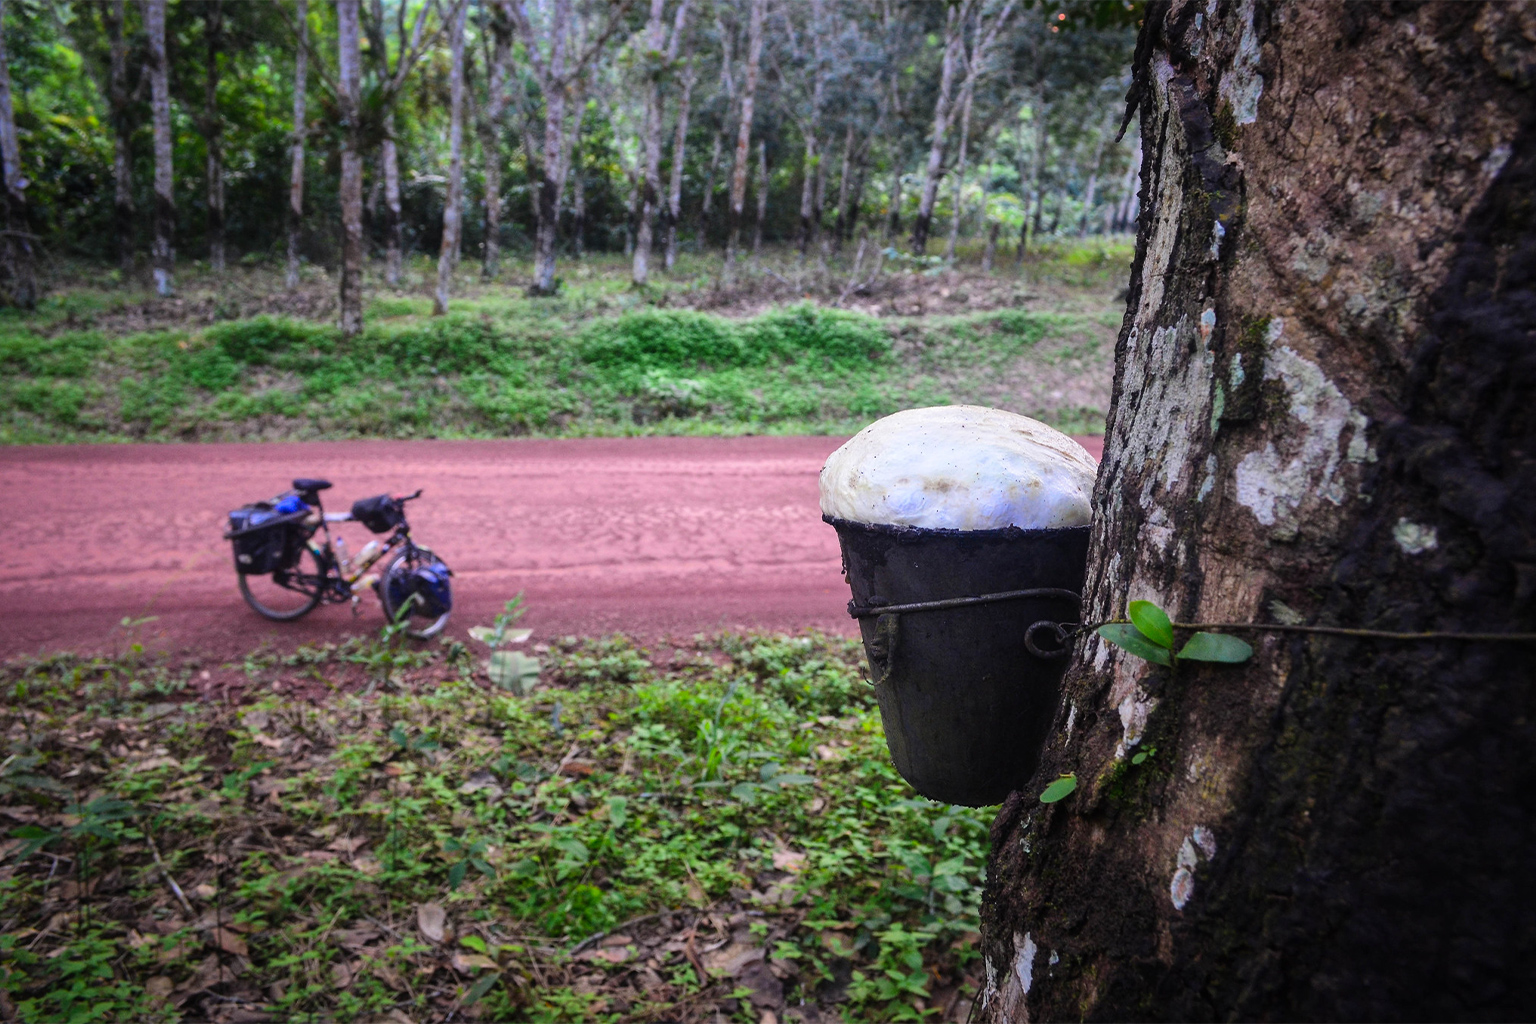 Latex collection in a rubber plantation